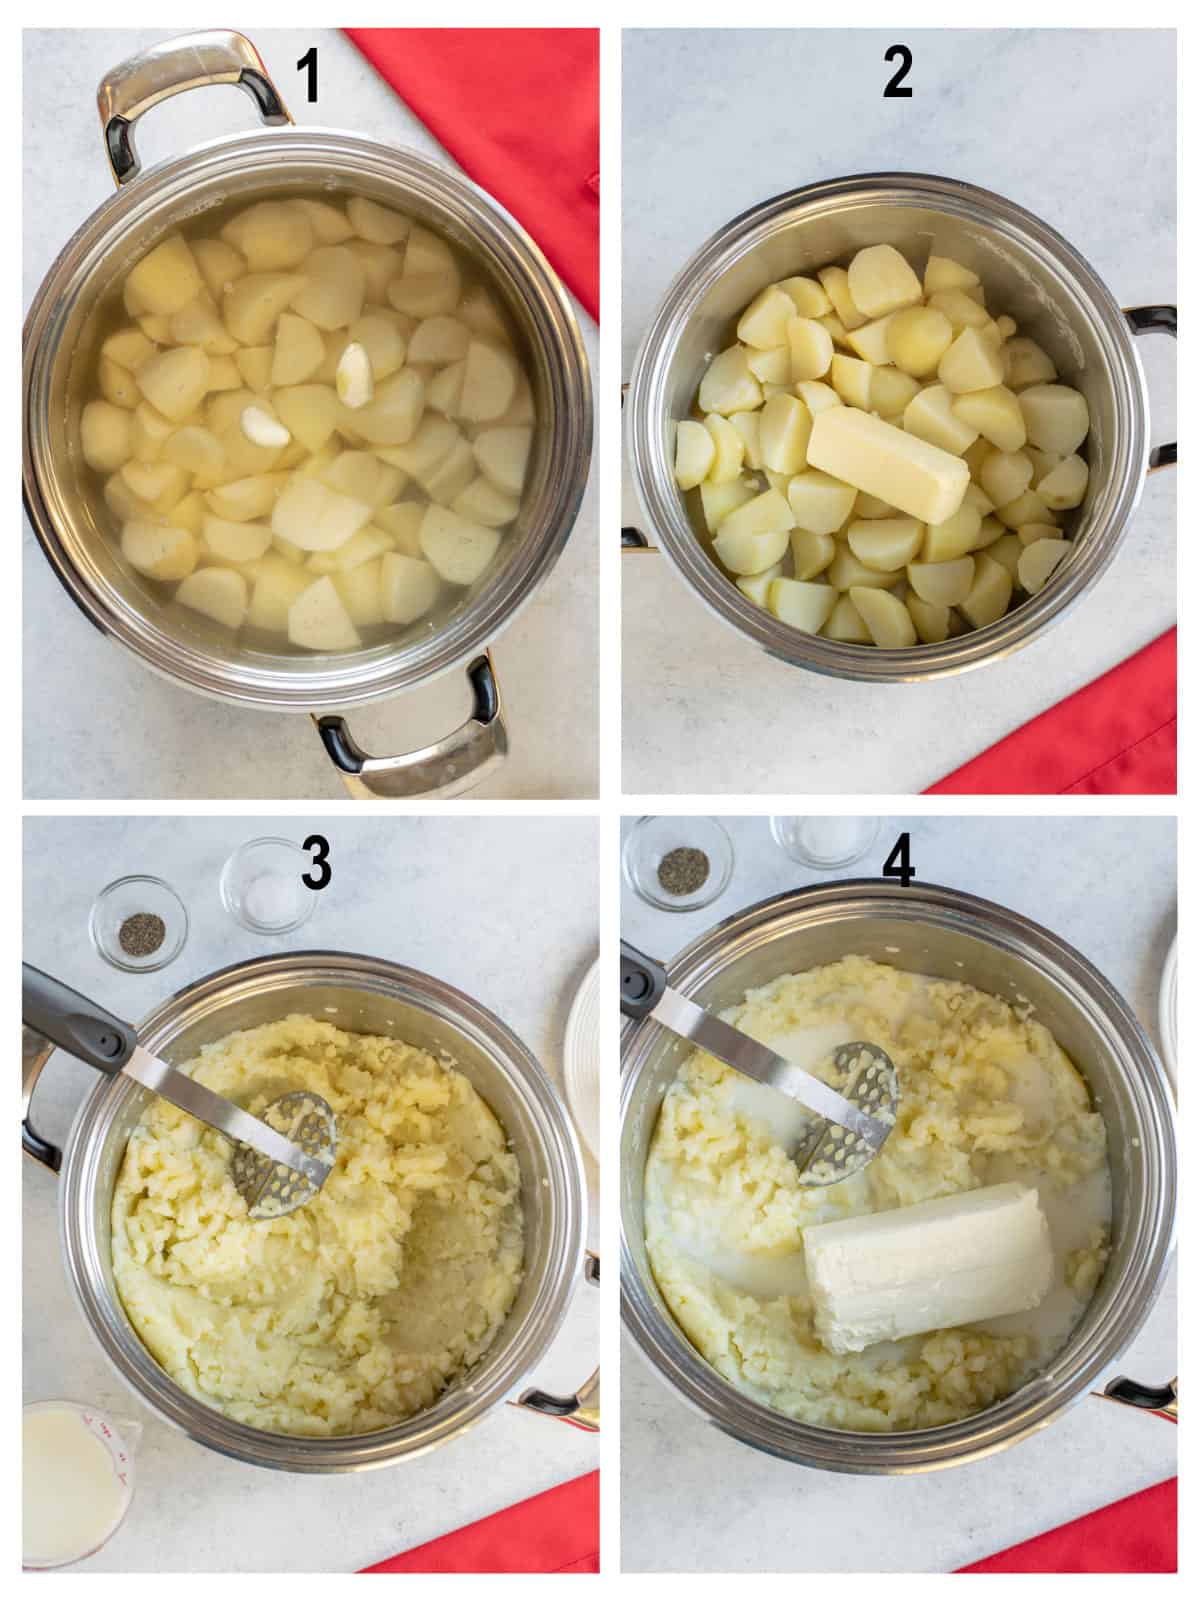 potatoes in pot of water, potatoes with butter, mashed potatoes, cream cheese, milk added